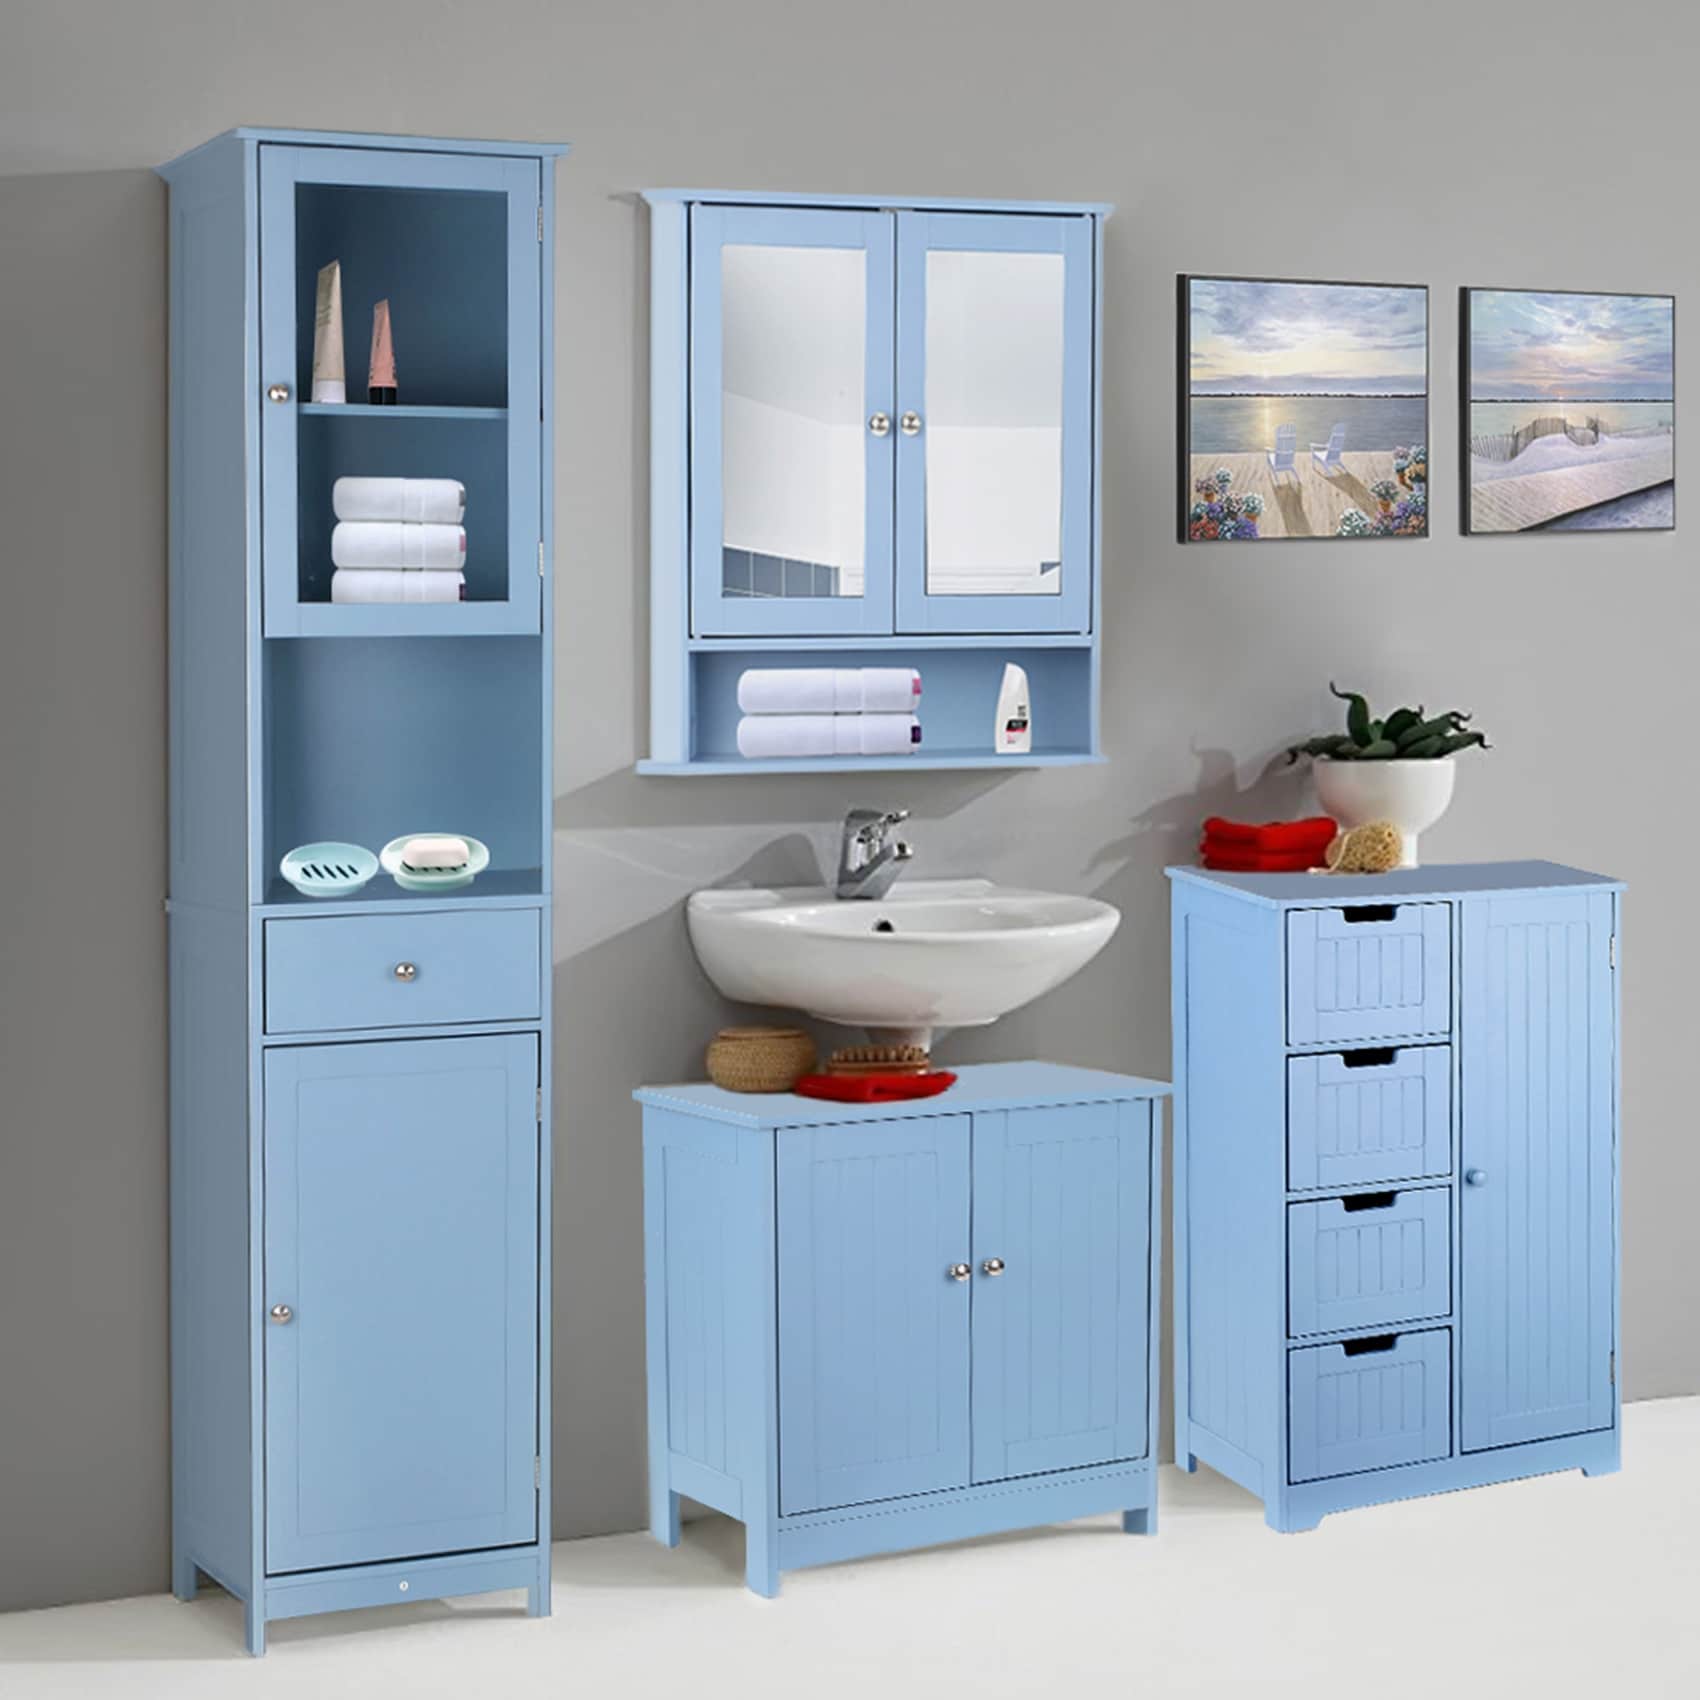 https://ak1.ostkcdn.com/images/products/is/images/direct/54500ce1fa7ba24bfcba1f96cd1bfc9fb3e9055e/Modern-Under-Sink-Storage-Cabinet%2CBathroom-Vanity.jpg